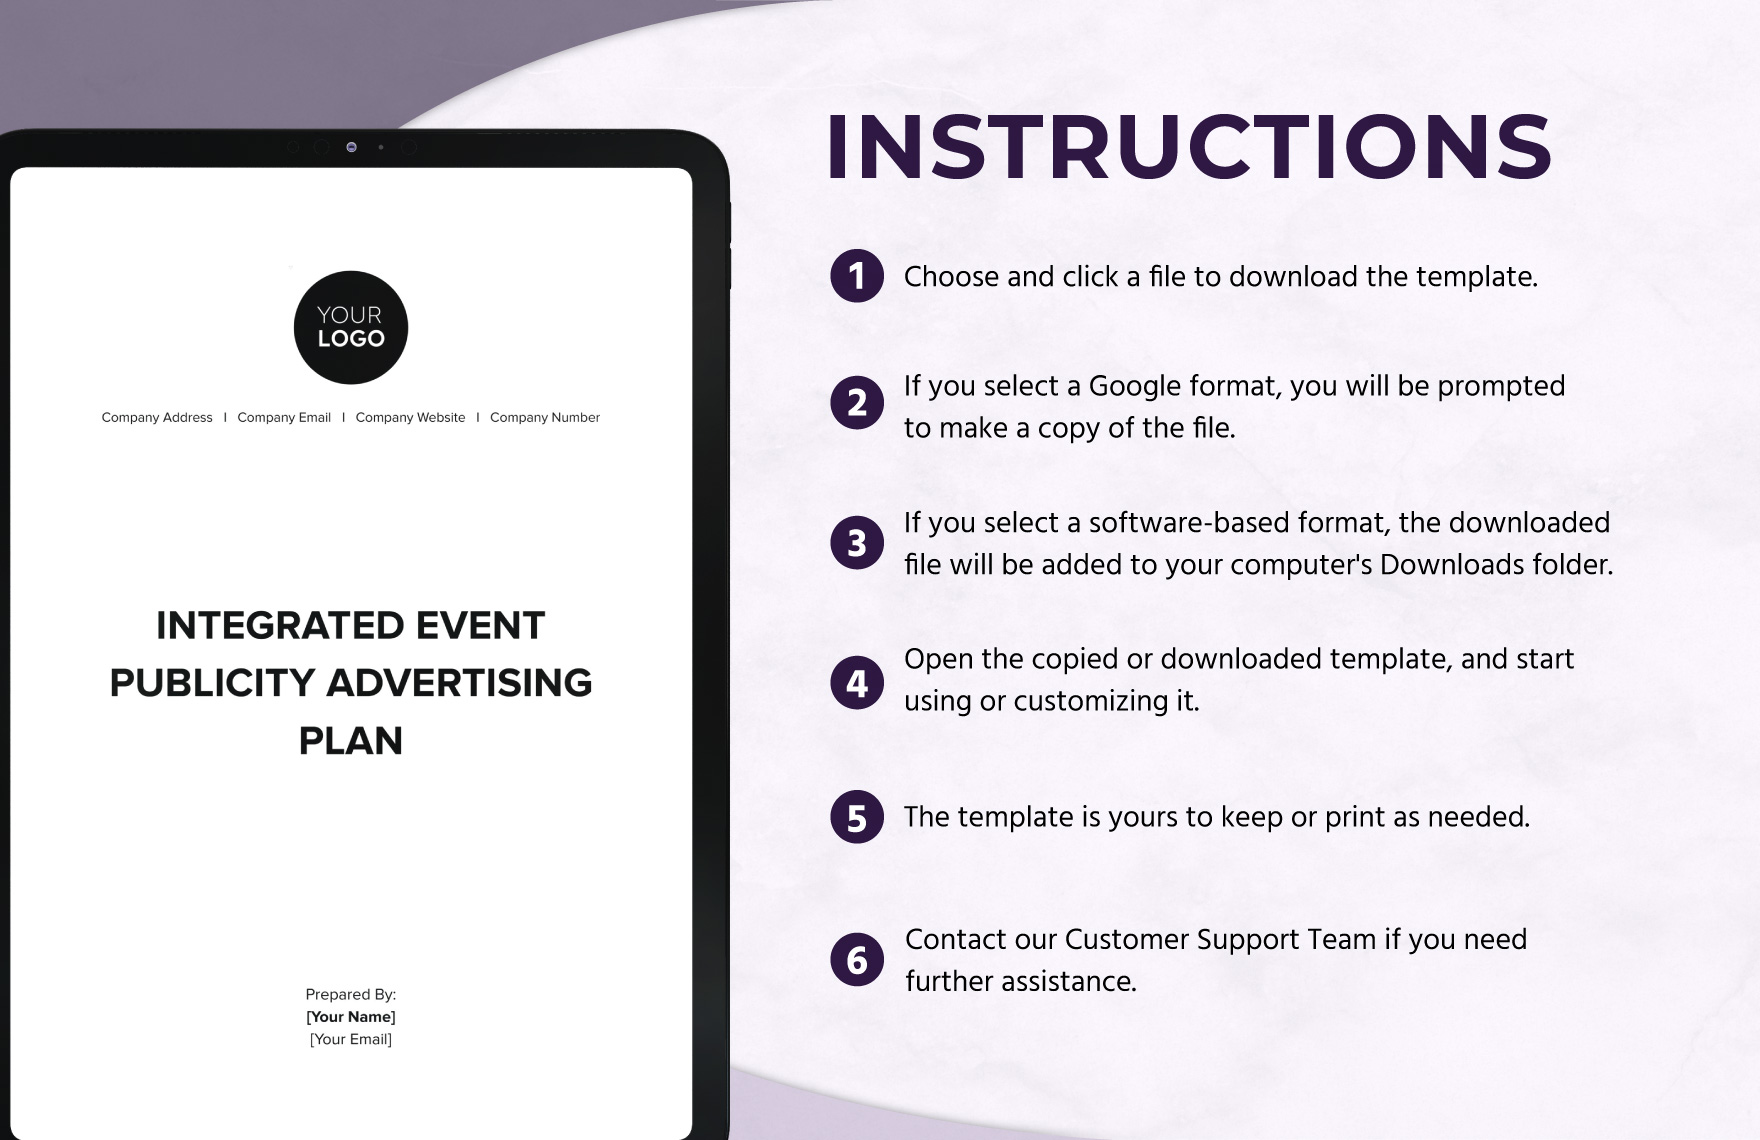 Integrated Event Publicity Advertising Plan Template